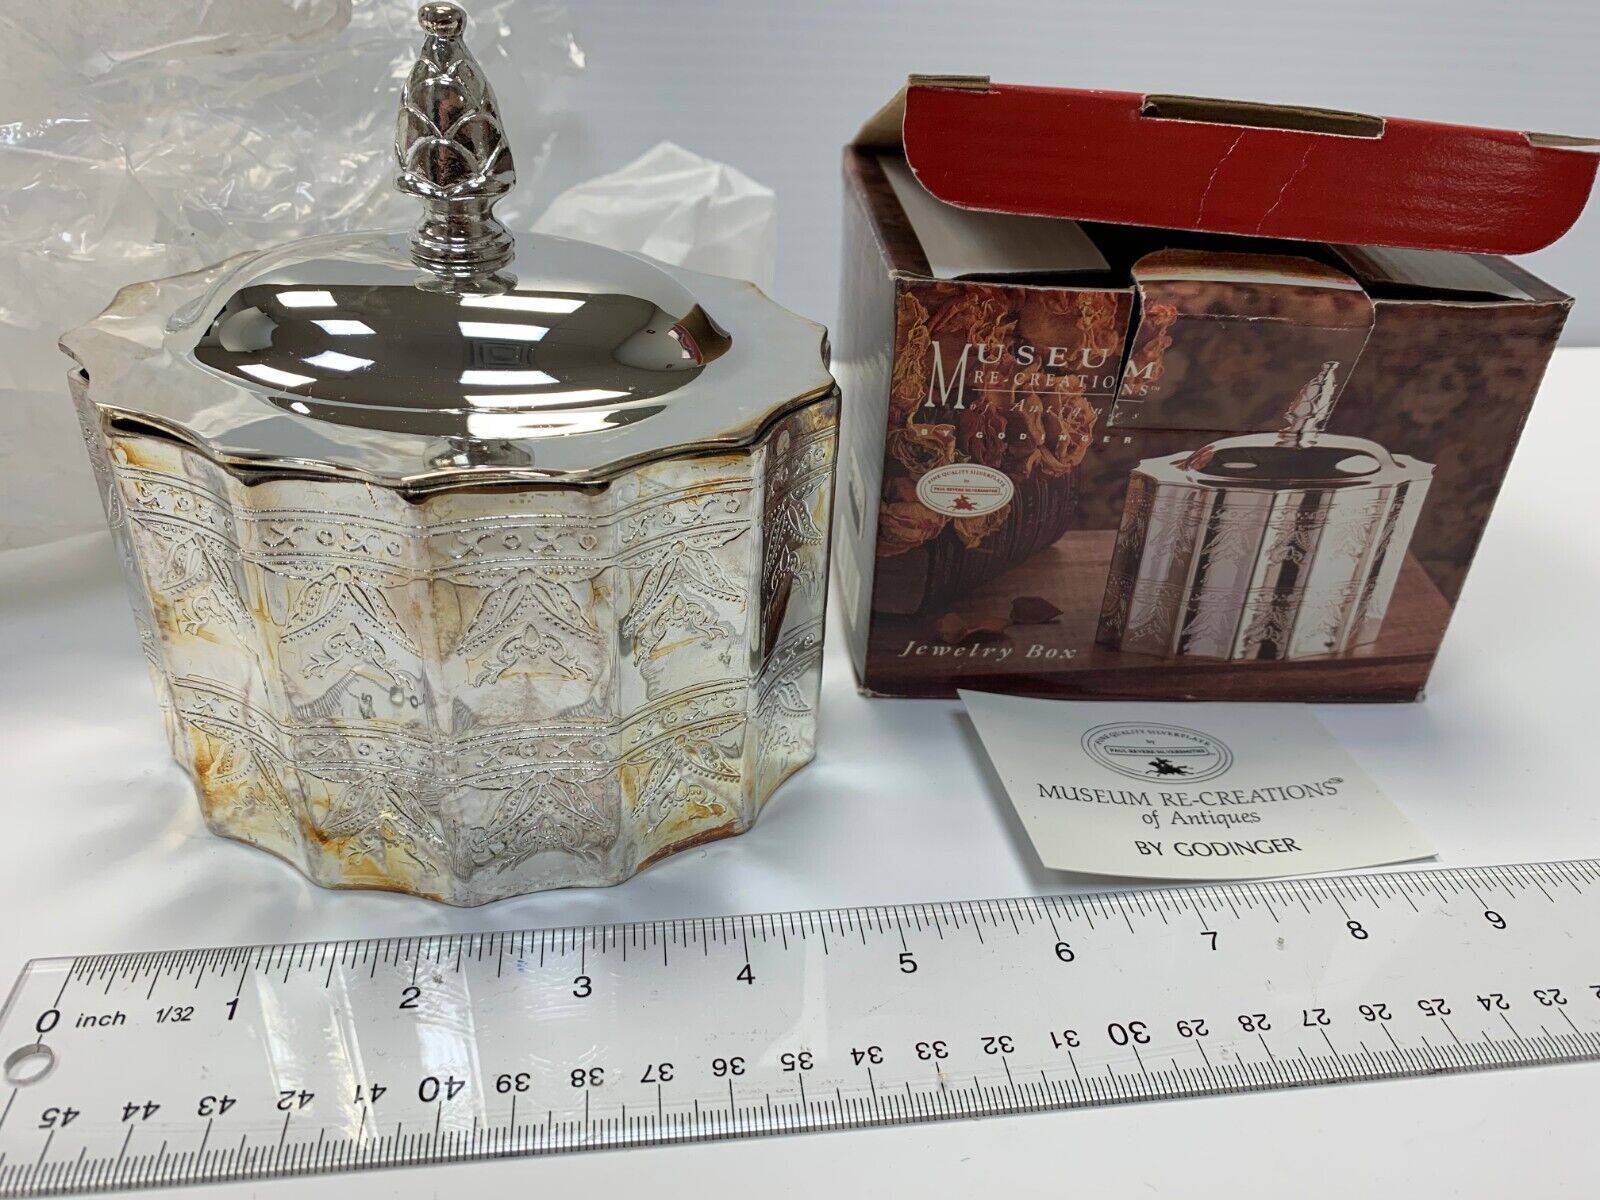 Vintage Godinger Museum Re-creations Silver Plate Jewelry Box New in Box